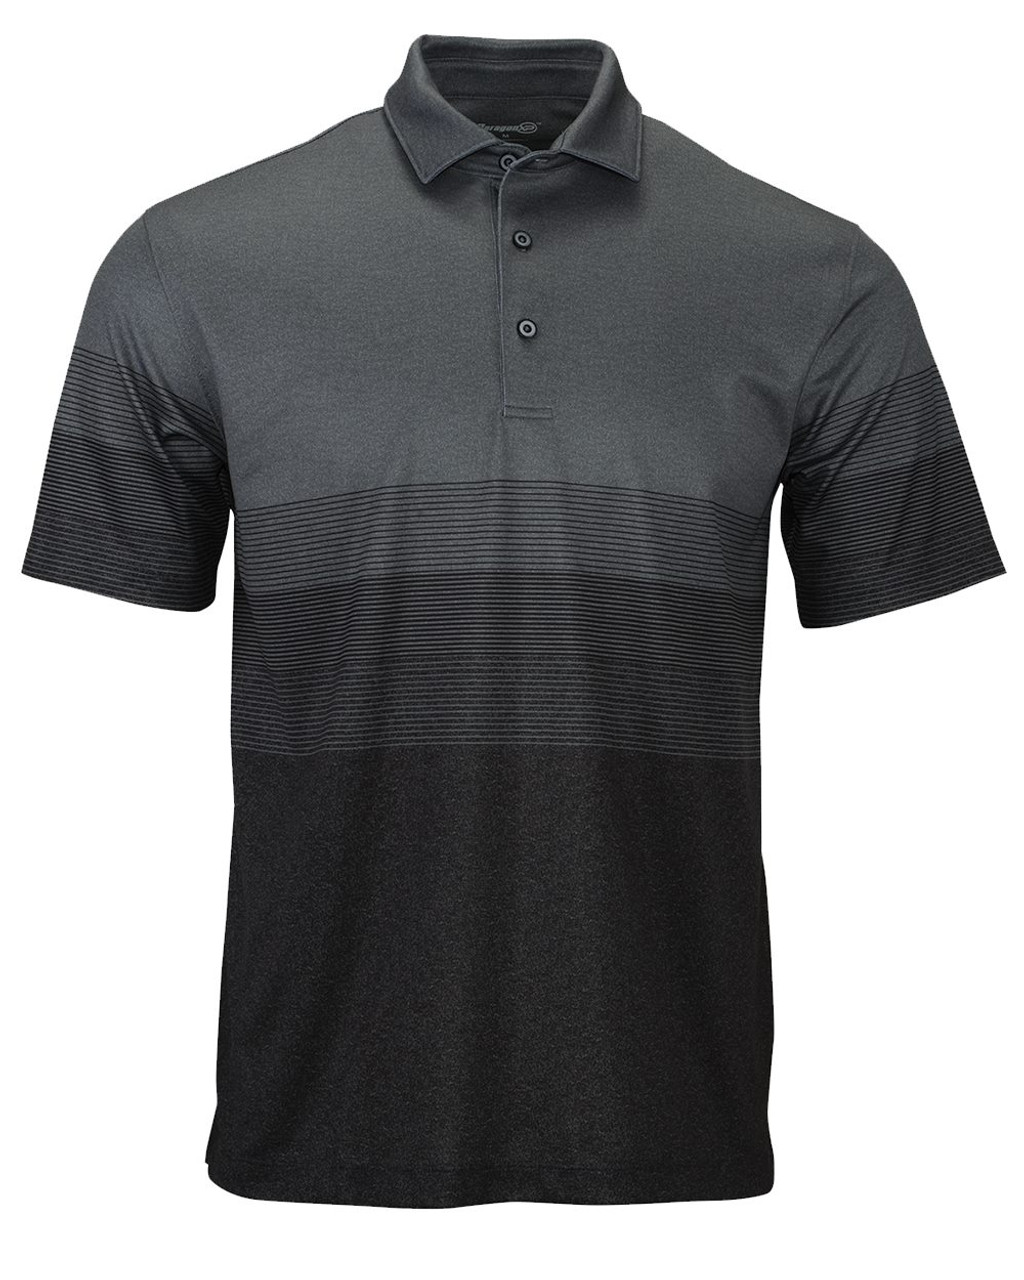 Embroidered Belmont Sublimated Heathered Polo - 153